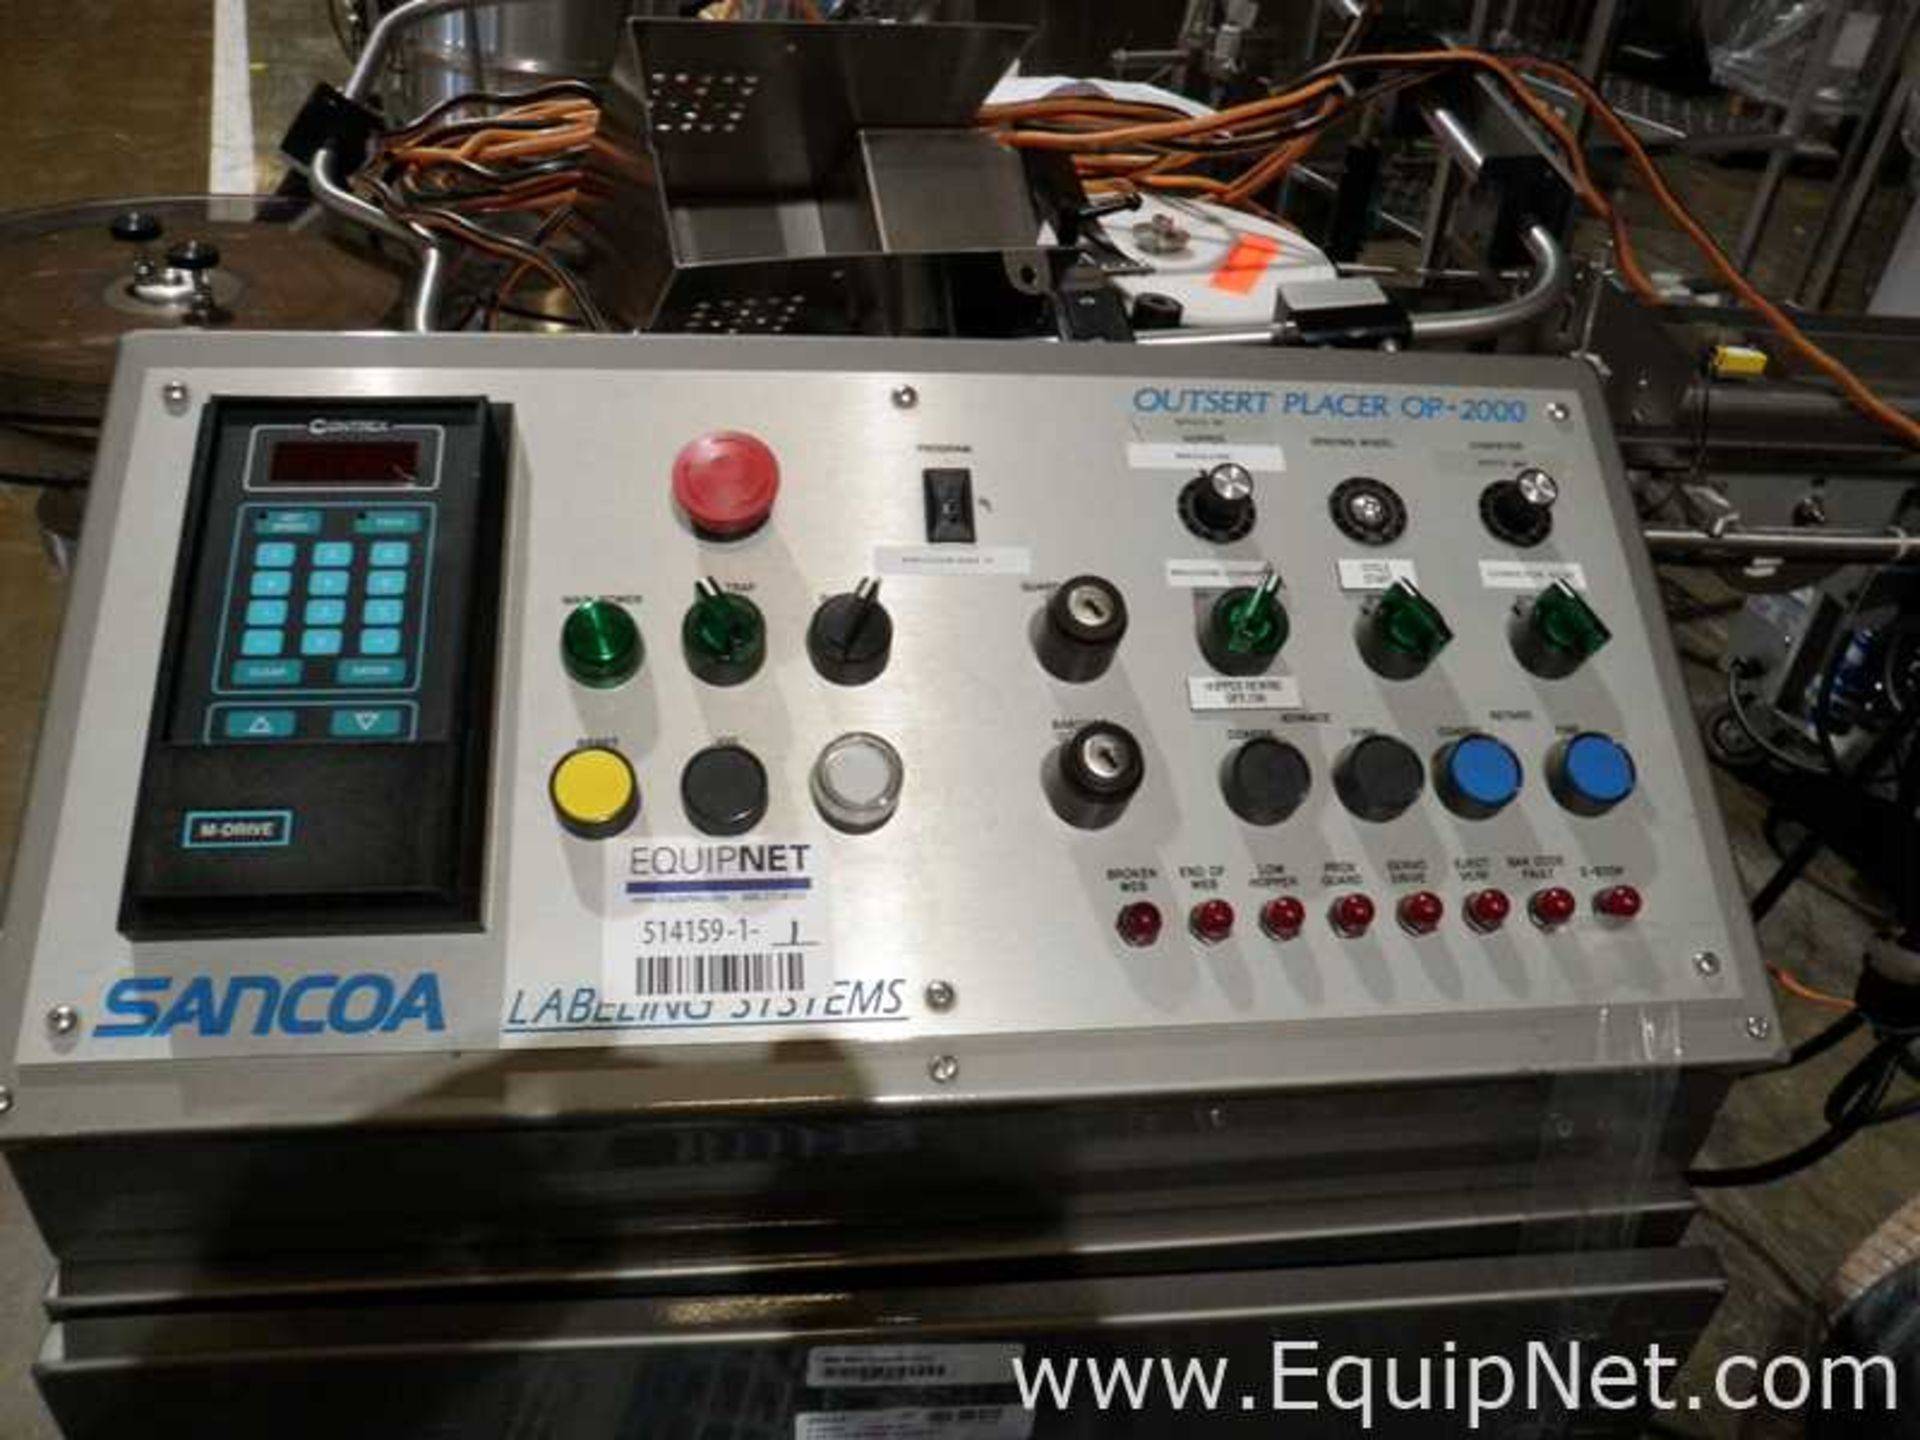 Sancoa OP-2000 Outsert Placer - Image 5 of 6